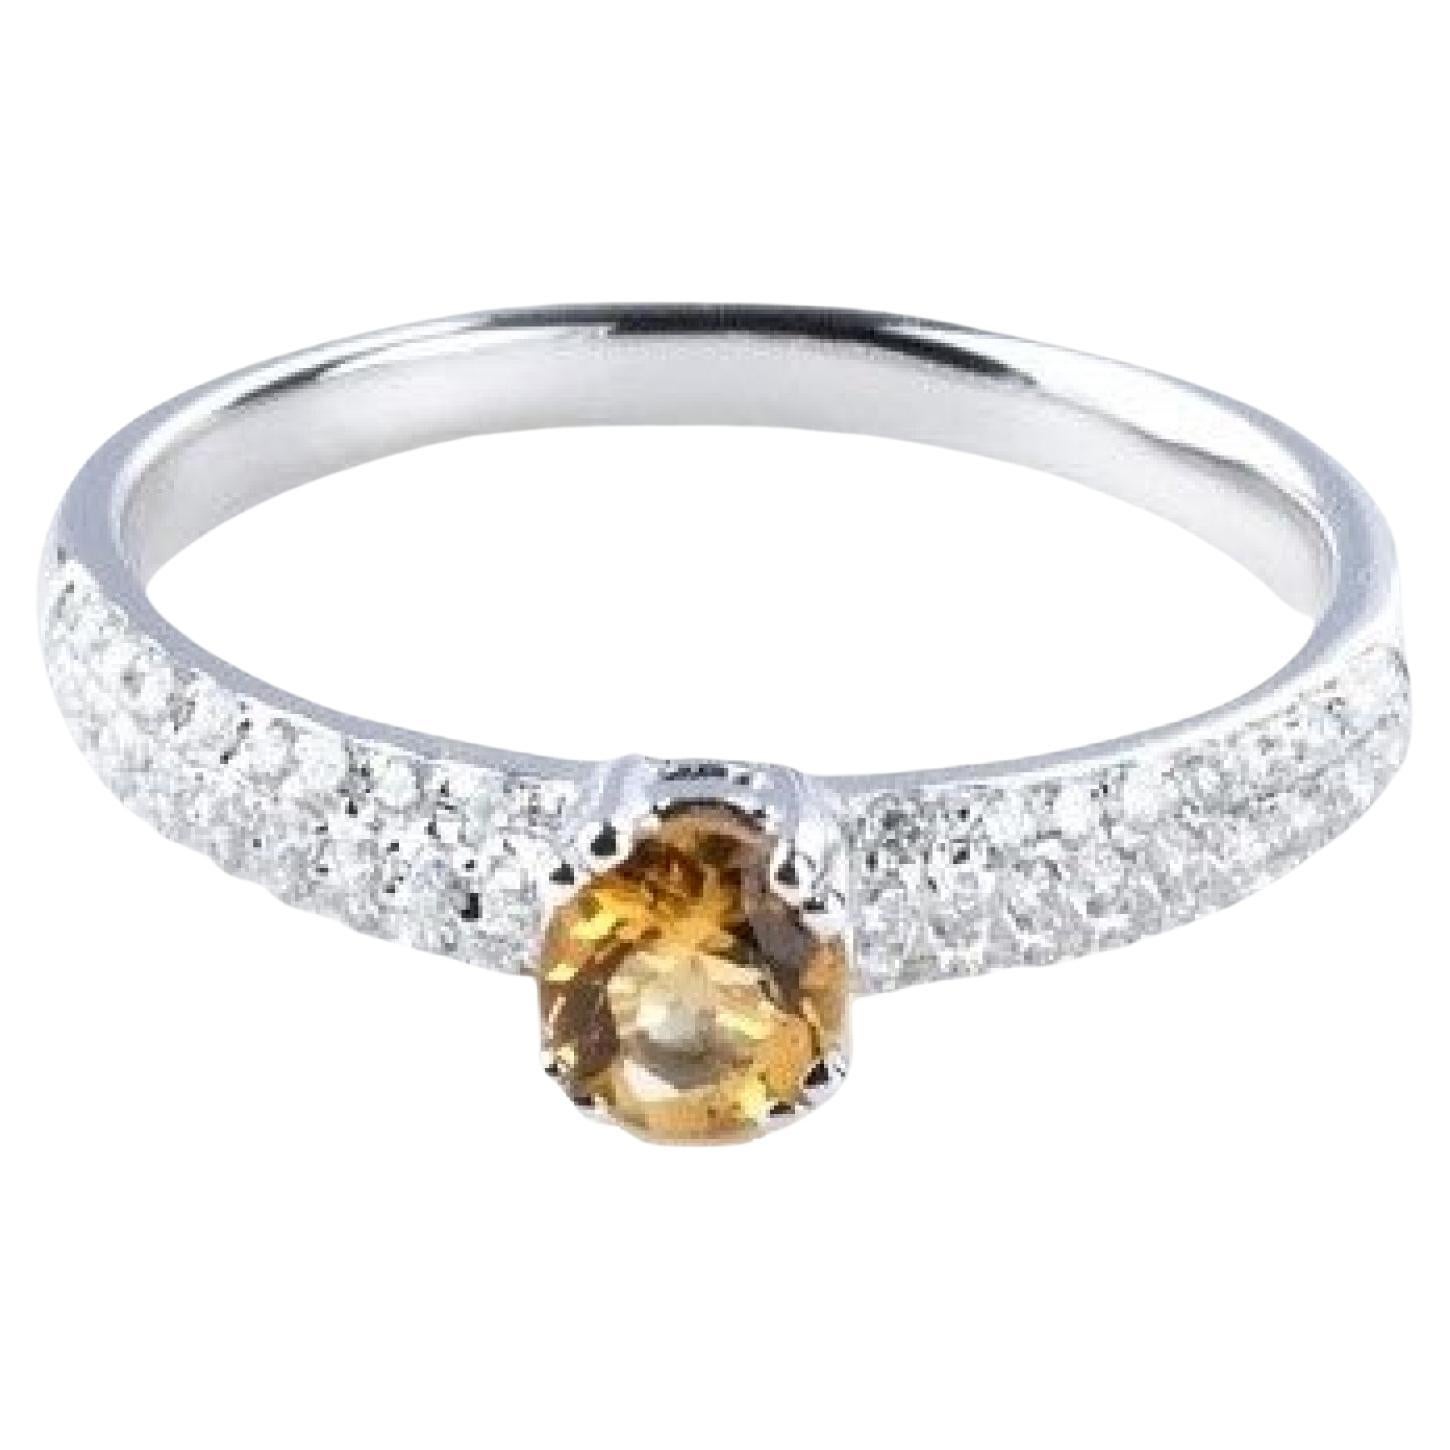 For Sale:  0.335 Carat Citrine and Diamond Ring in 14 Karat White Gold